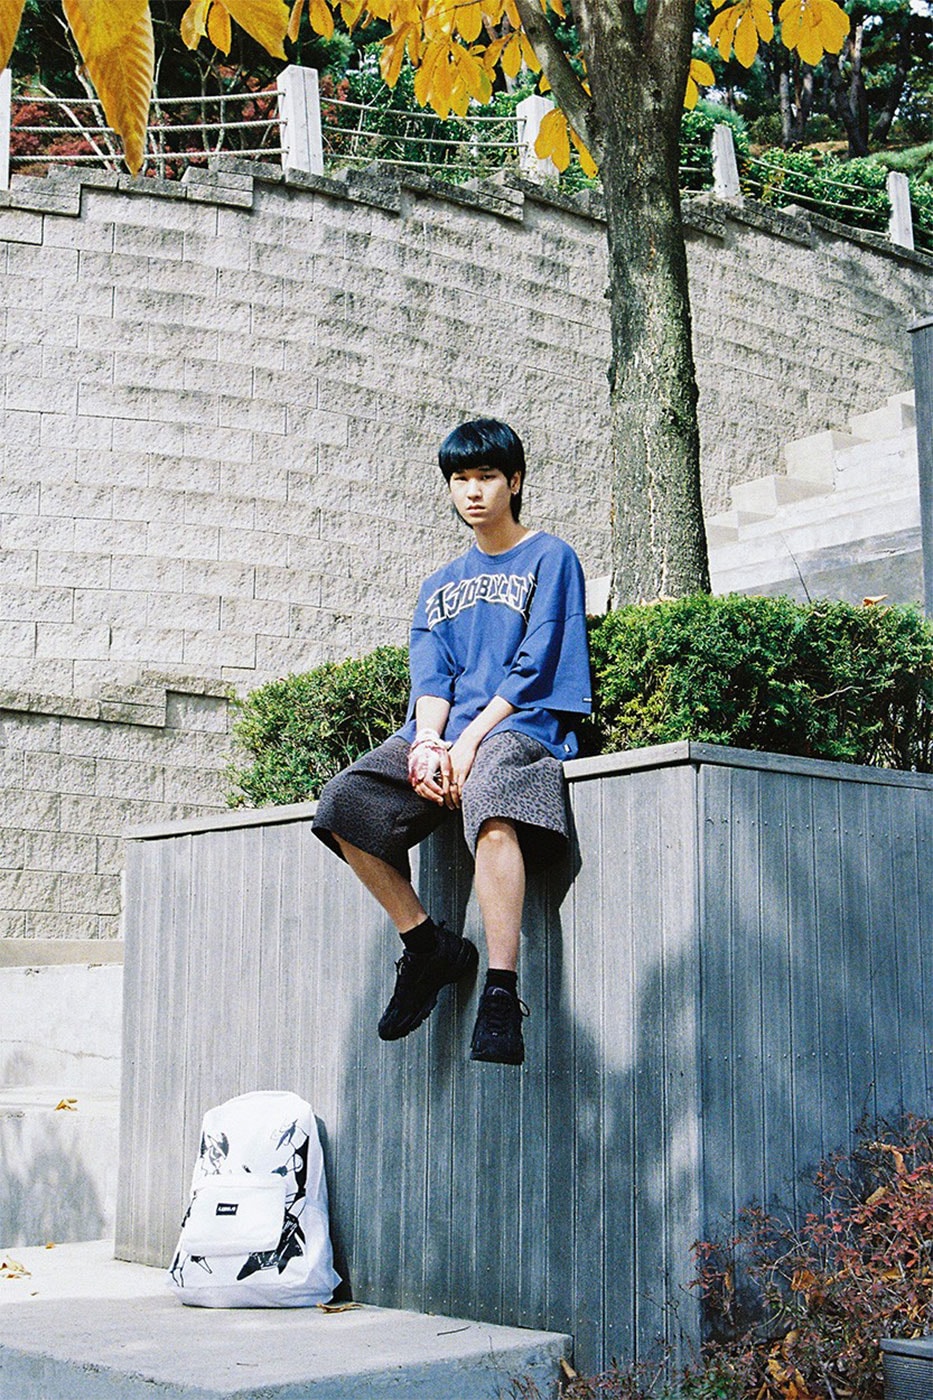 AJOBYAJO SS22 Collection Boys Can Cry Lookbook Release Info Buy Price South Korea T-shirts Shirts Check Stripes Denim Suits Backpack Headband Robot